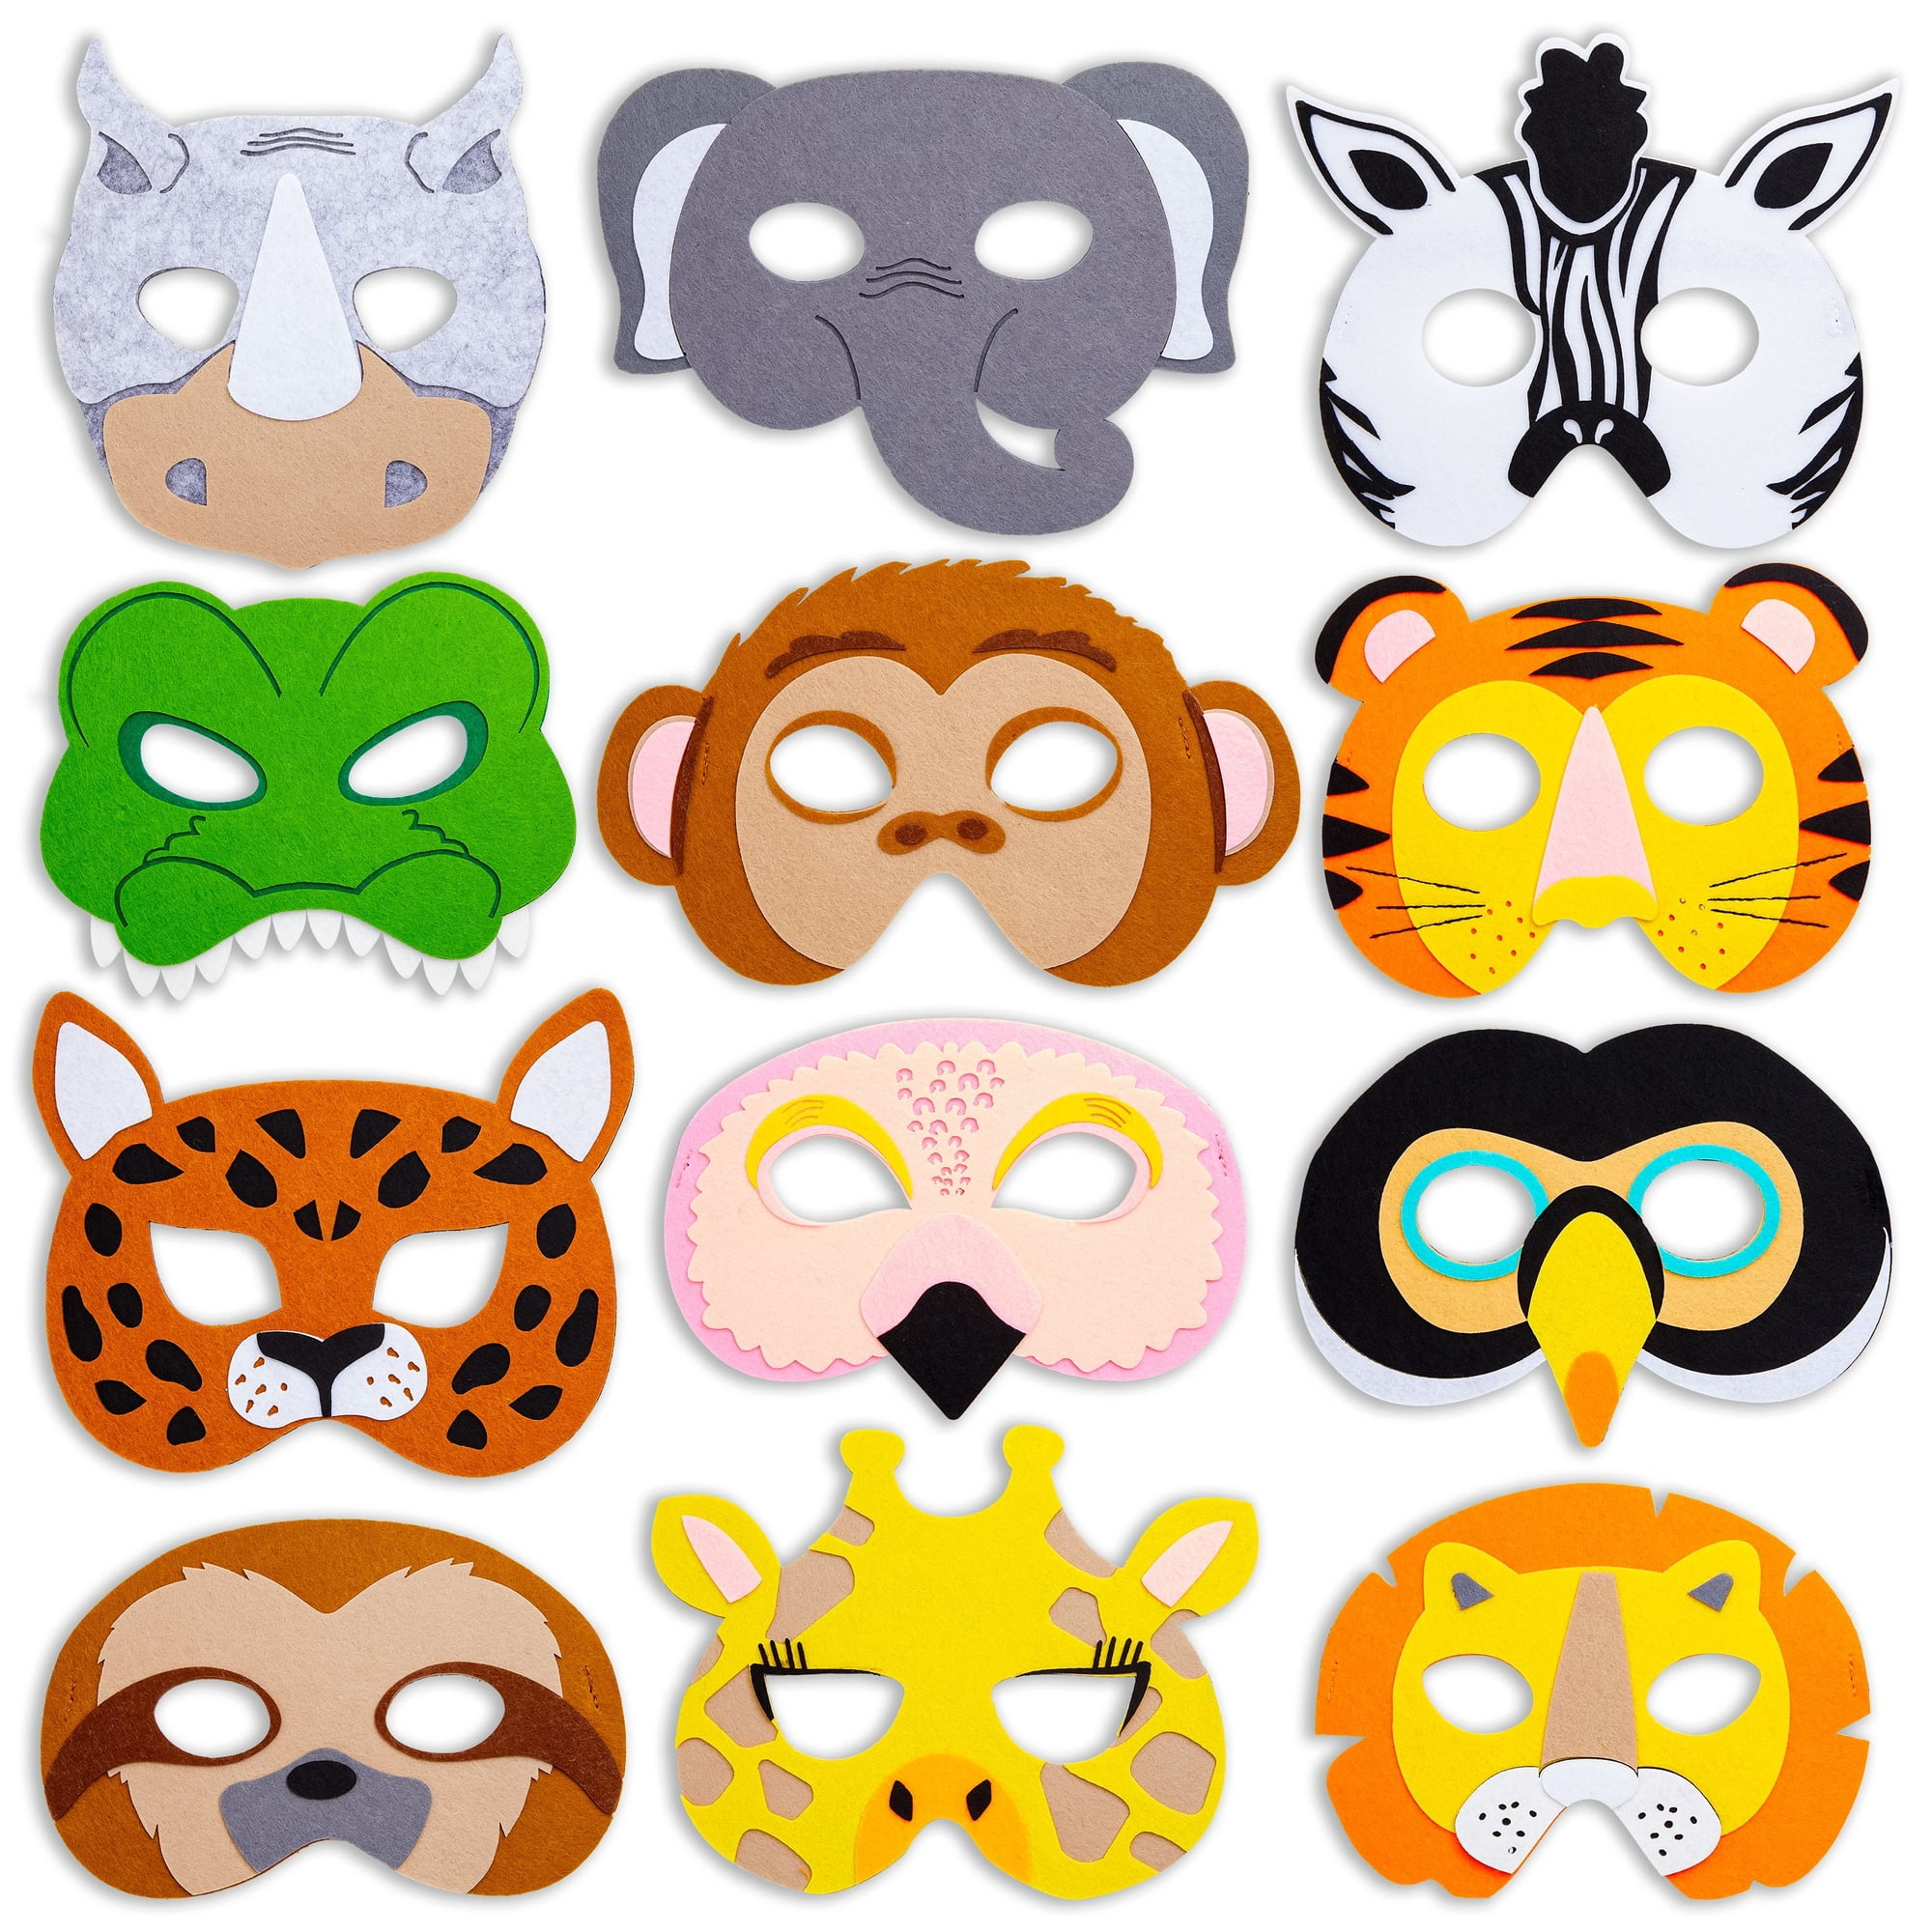 Blue Panda 12-Pack Felt Animal Masks for Kids' Farm-themed Birthday Party, 12 Unique Animal Designs, Includes Cow, Chicken, Rooster, Pig, Bunny, Sheep